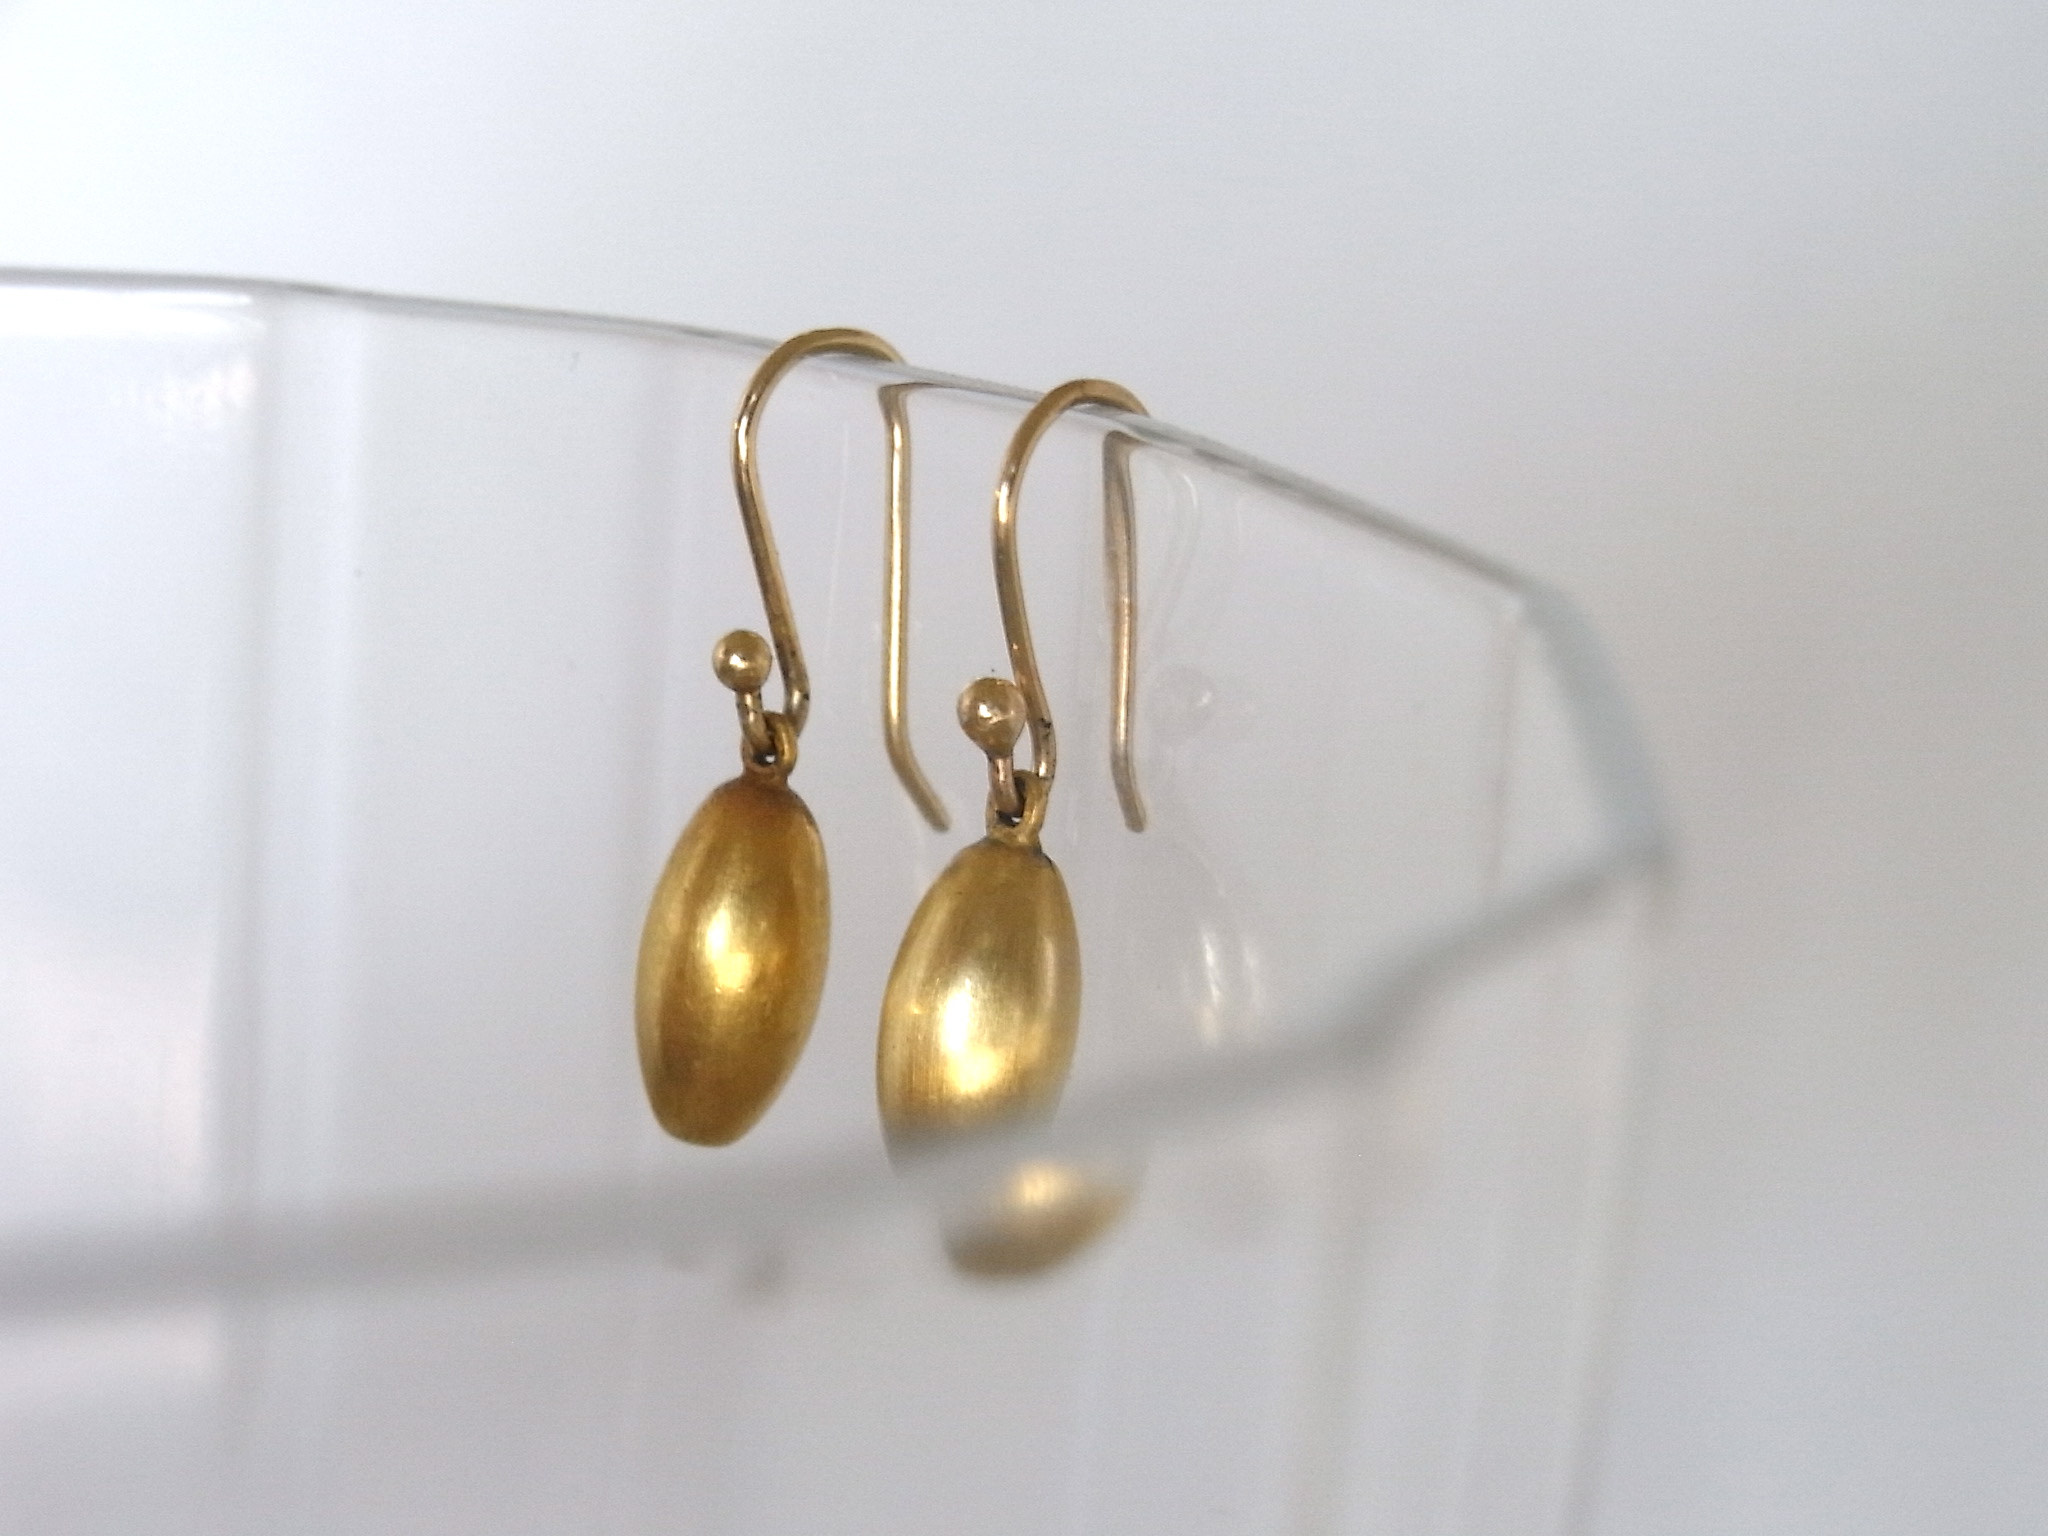 organ » Blog Archive » Ted Muehling's earring